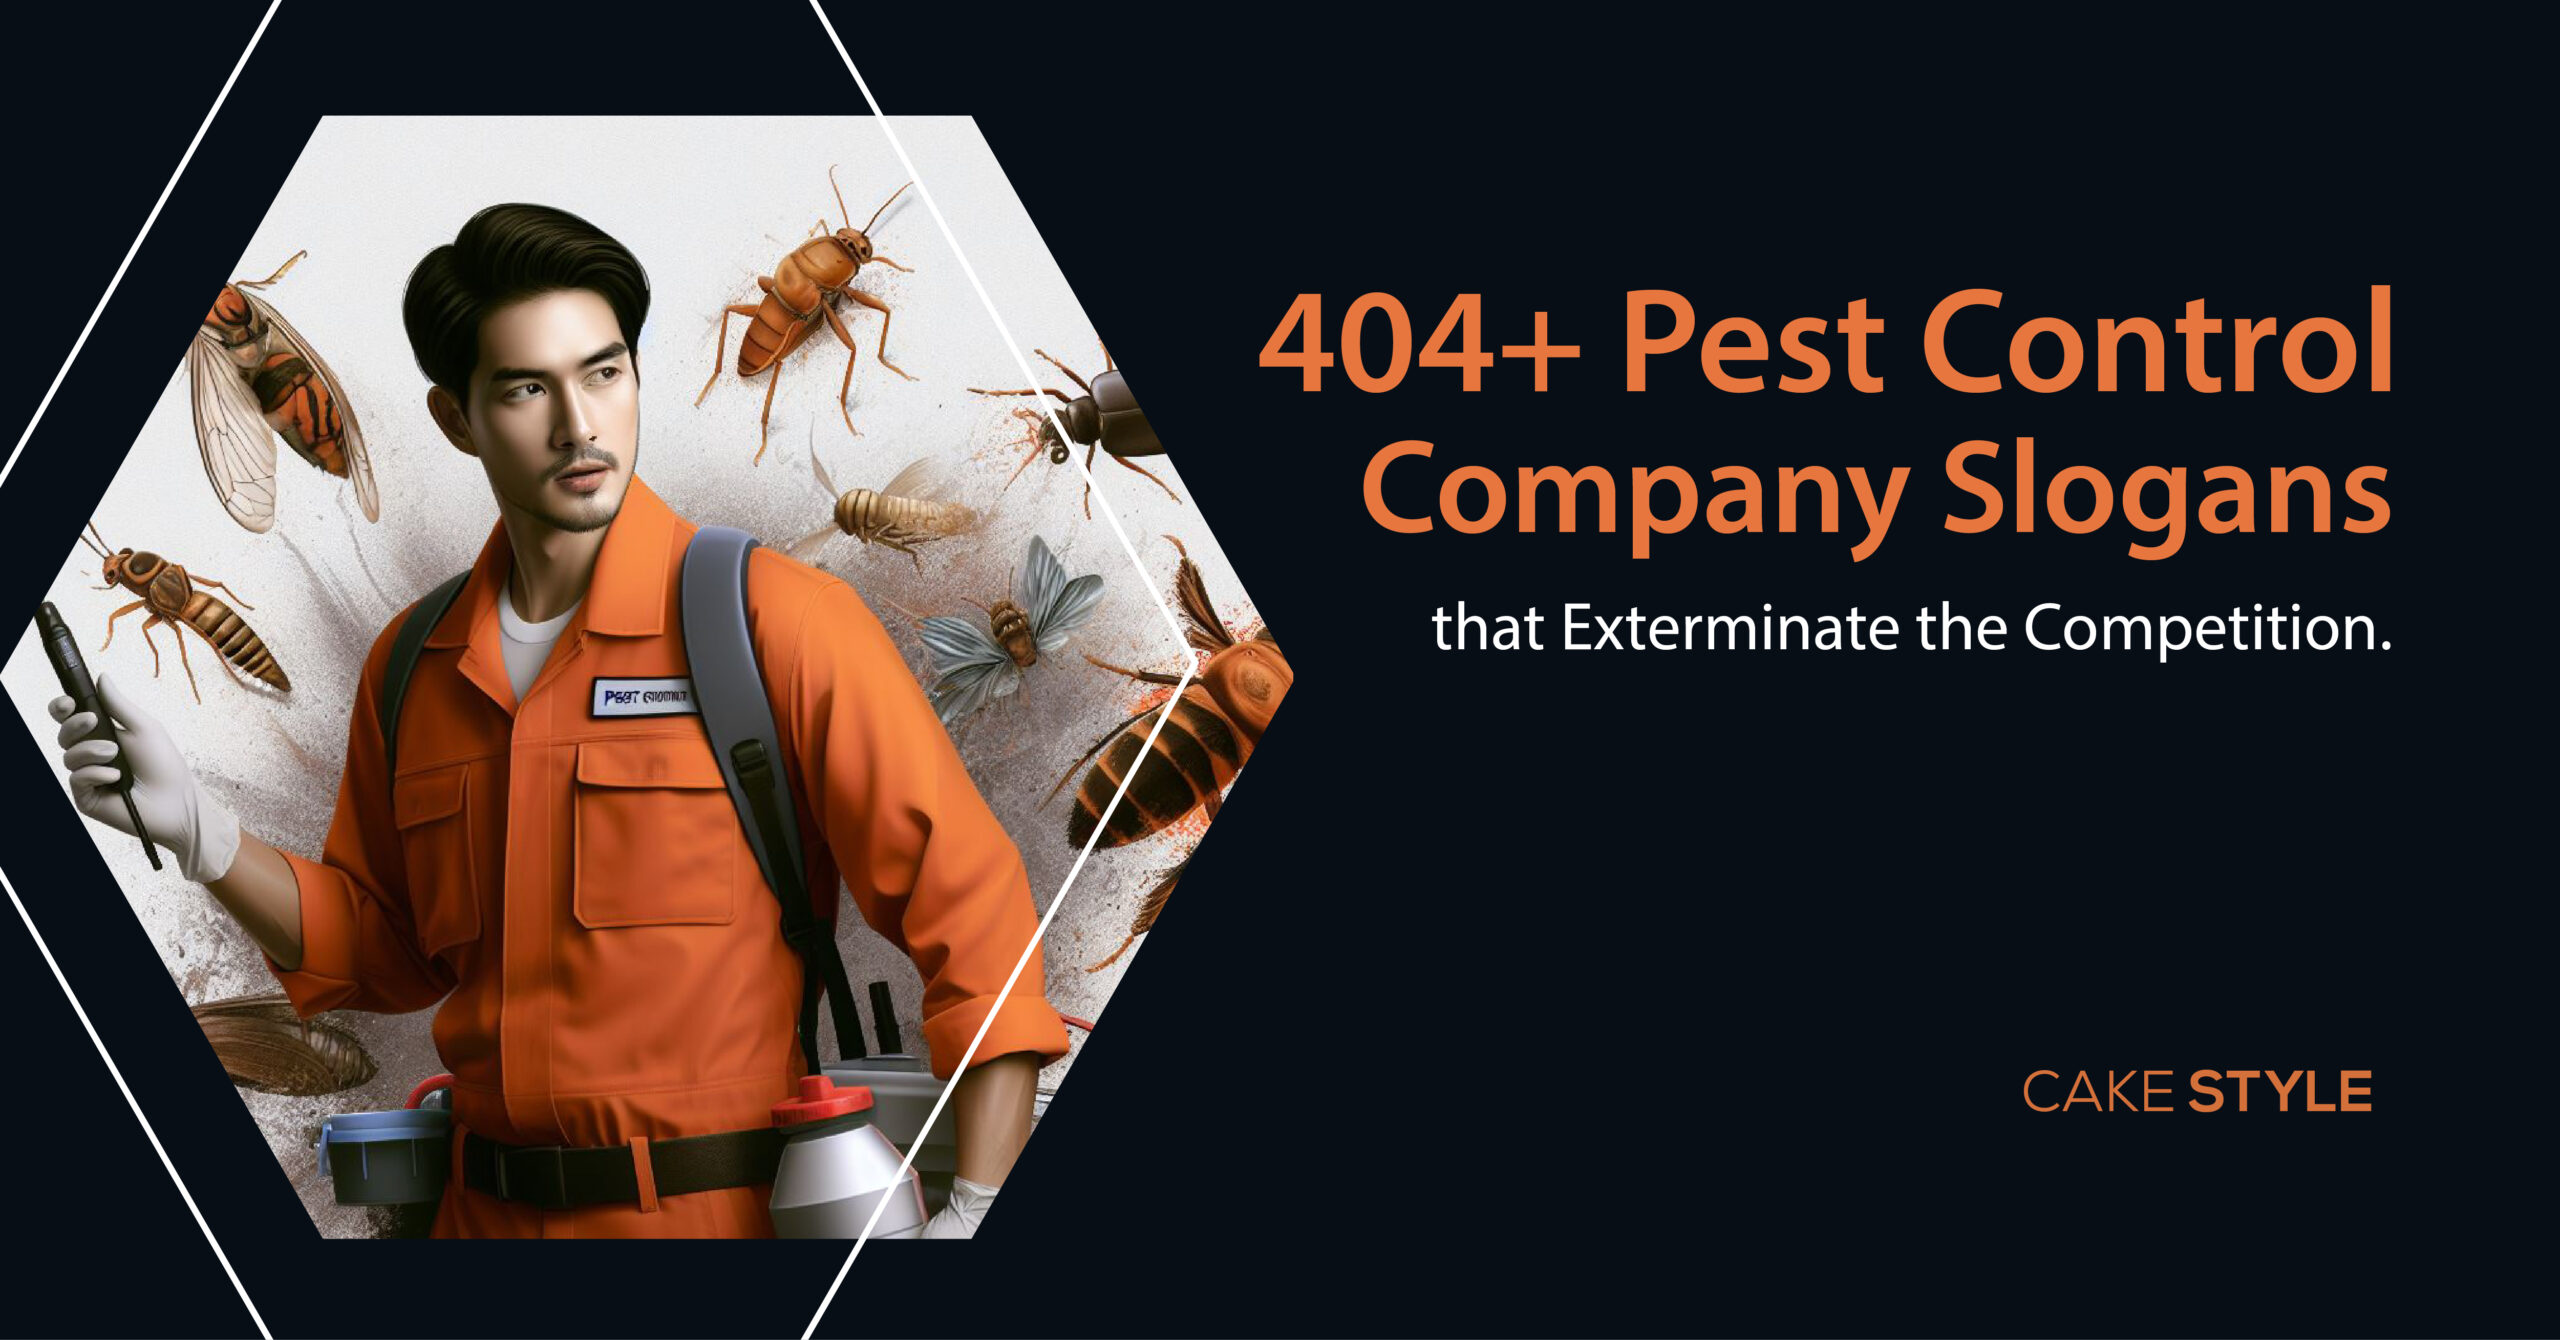 404+ Pest Control Company Slogans that Exterminate the Competition